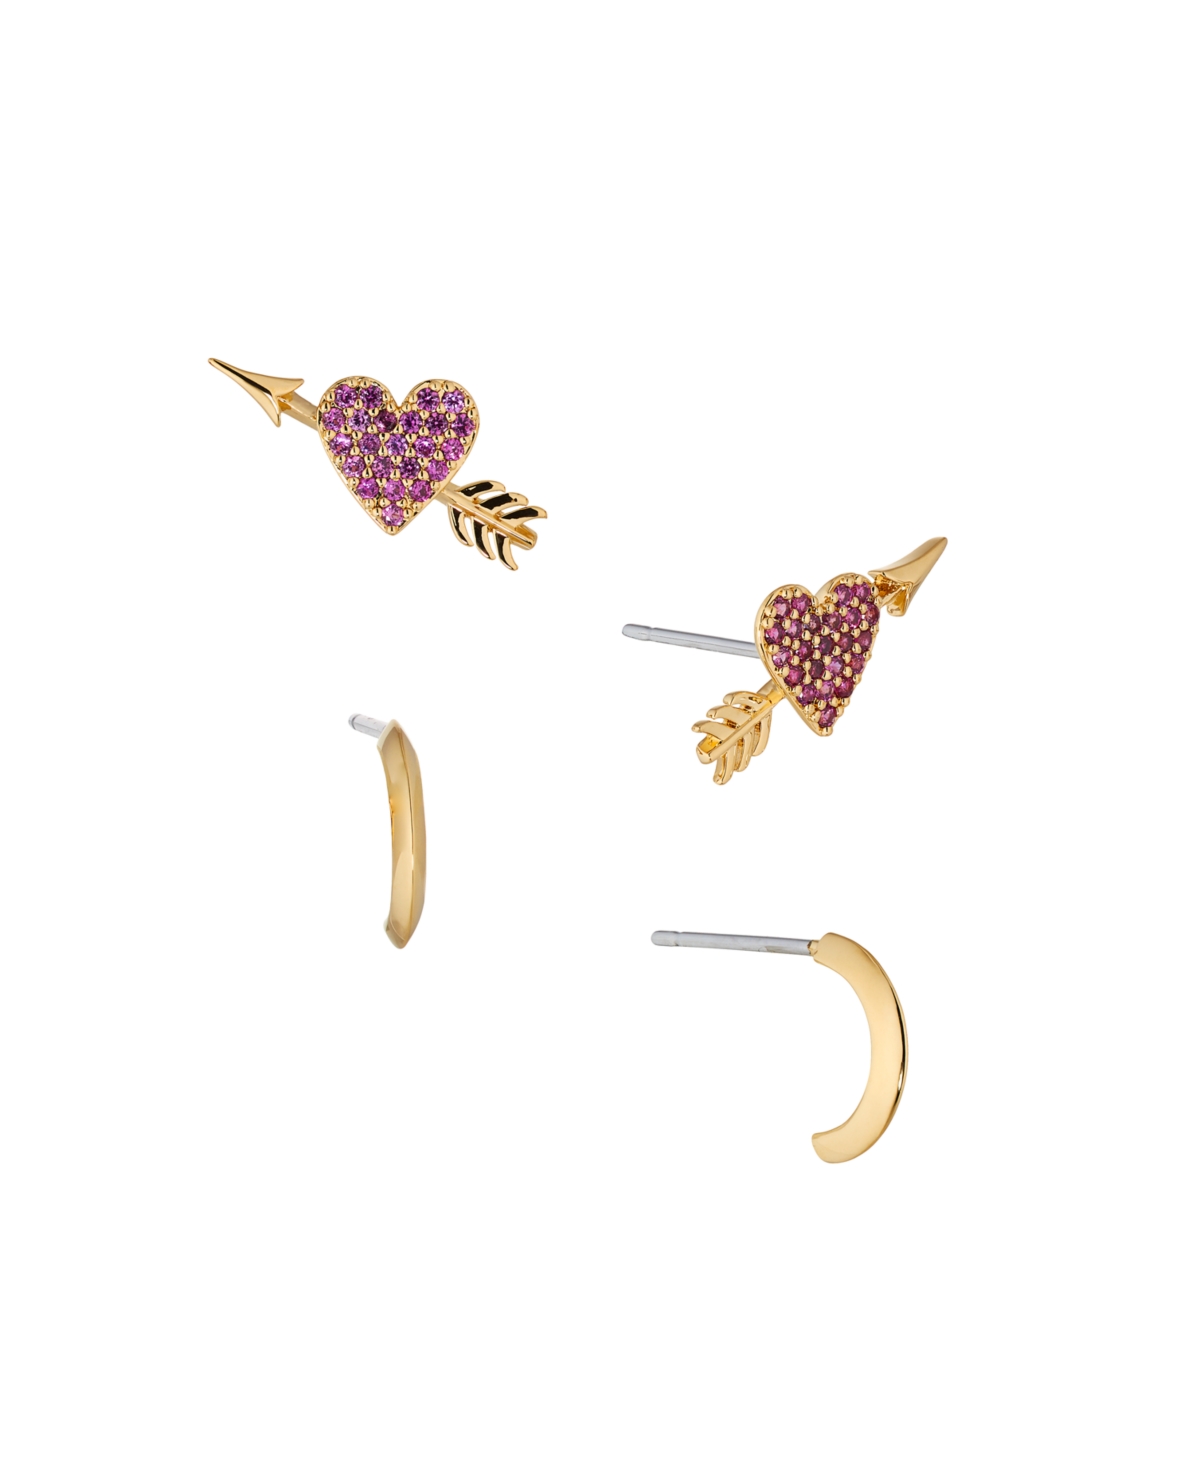 Ava Nadri Drop And Heart Stud Earrings Set, 4 Pieces In Pink/gold